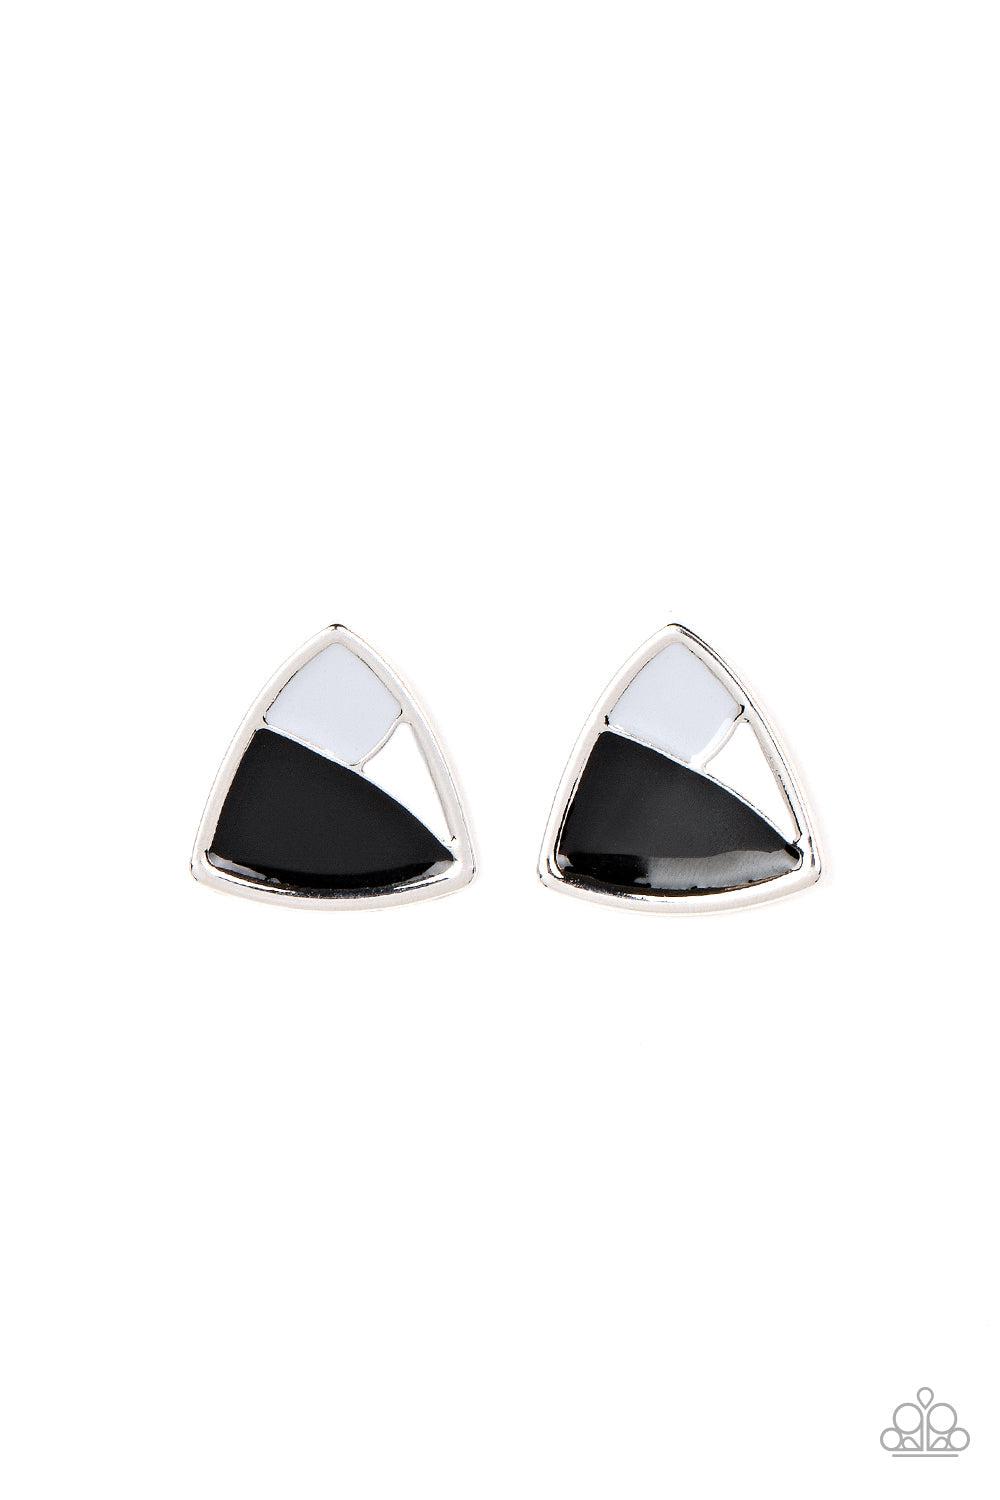 Kaleidoscopic Collision Black &amp; White Earrings - Paparazzi Accessories- lightbox - CarasShop.com - $5 Jewelry by Cara Jewels